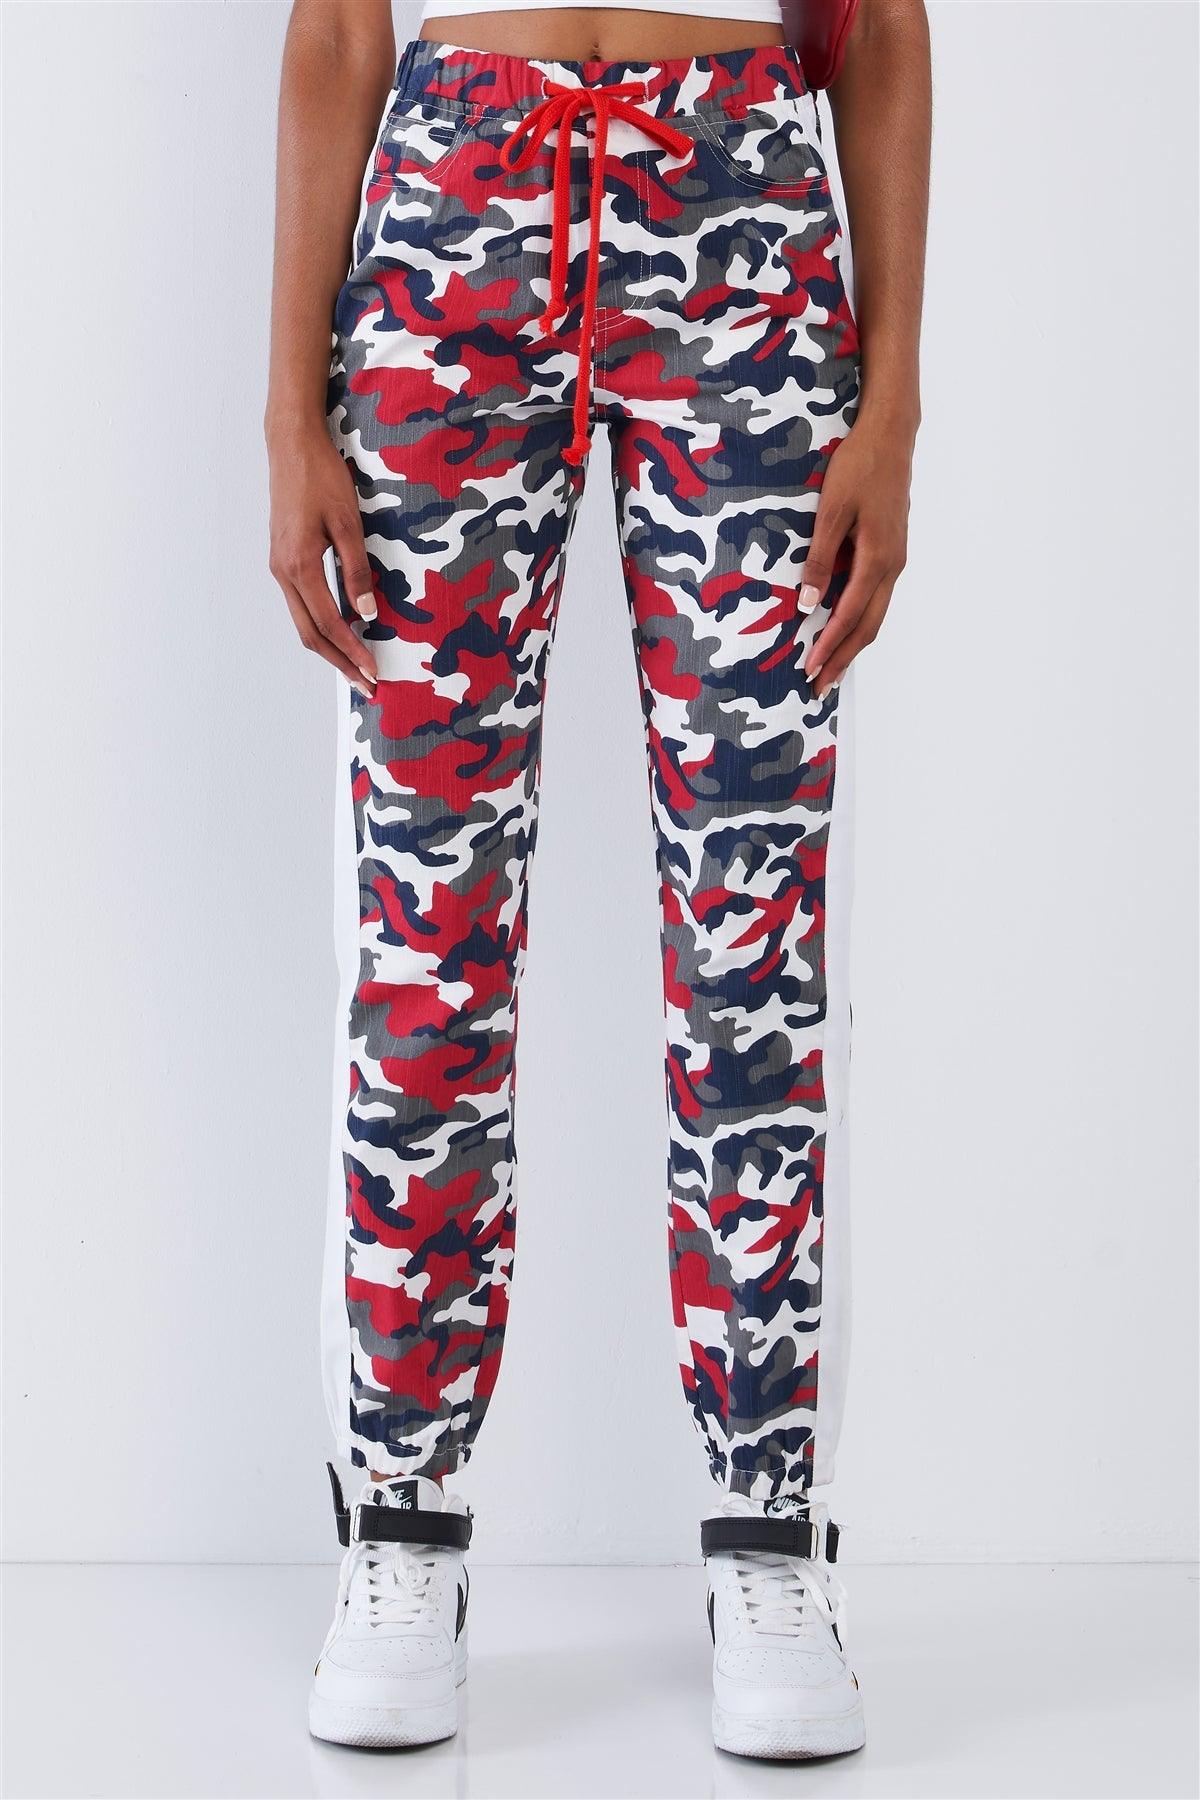 Red & Blue Camouflage High Waisted White Side Striped Elastic Waist Draw String Cargo Pants / 2-2-2